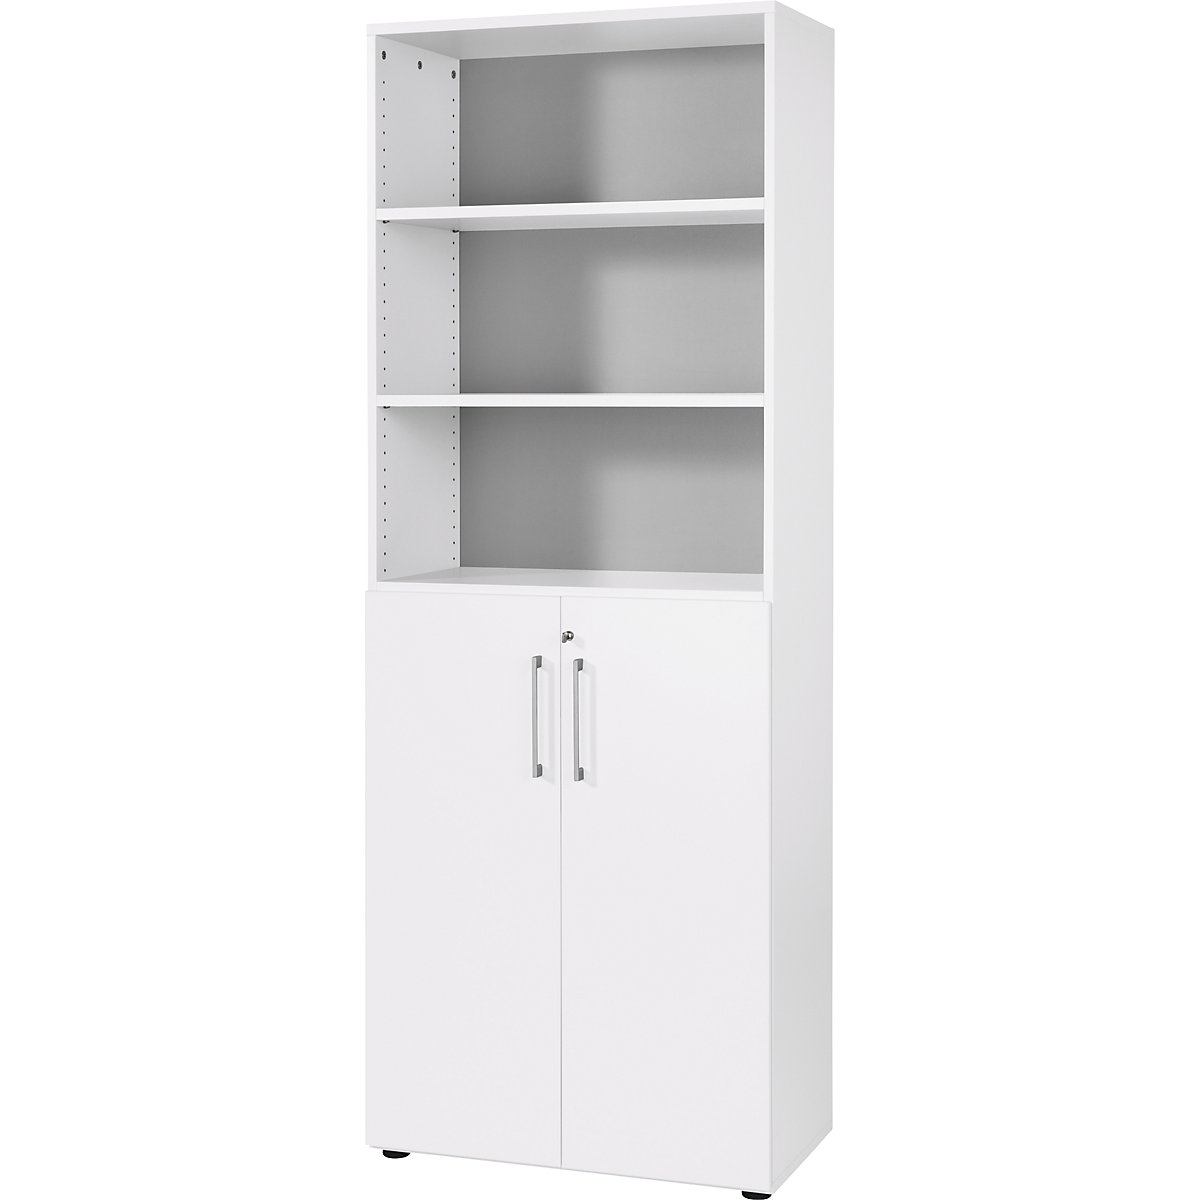 Office cupboard/shelf unit RENATUS – eurokraft pro, 5 shelves, 6 file heights (3 of which are open), white-11